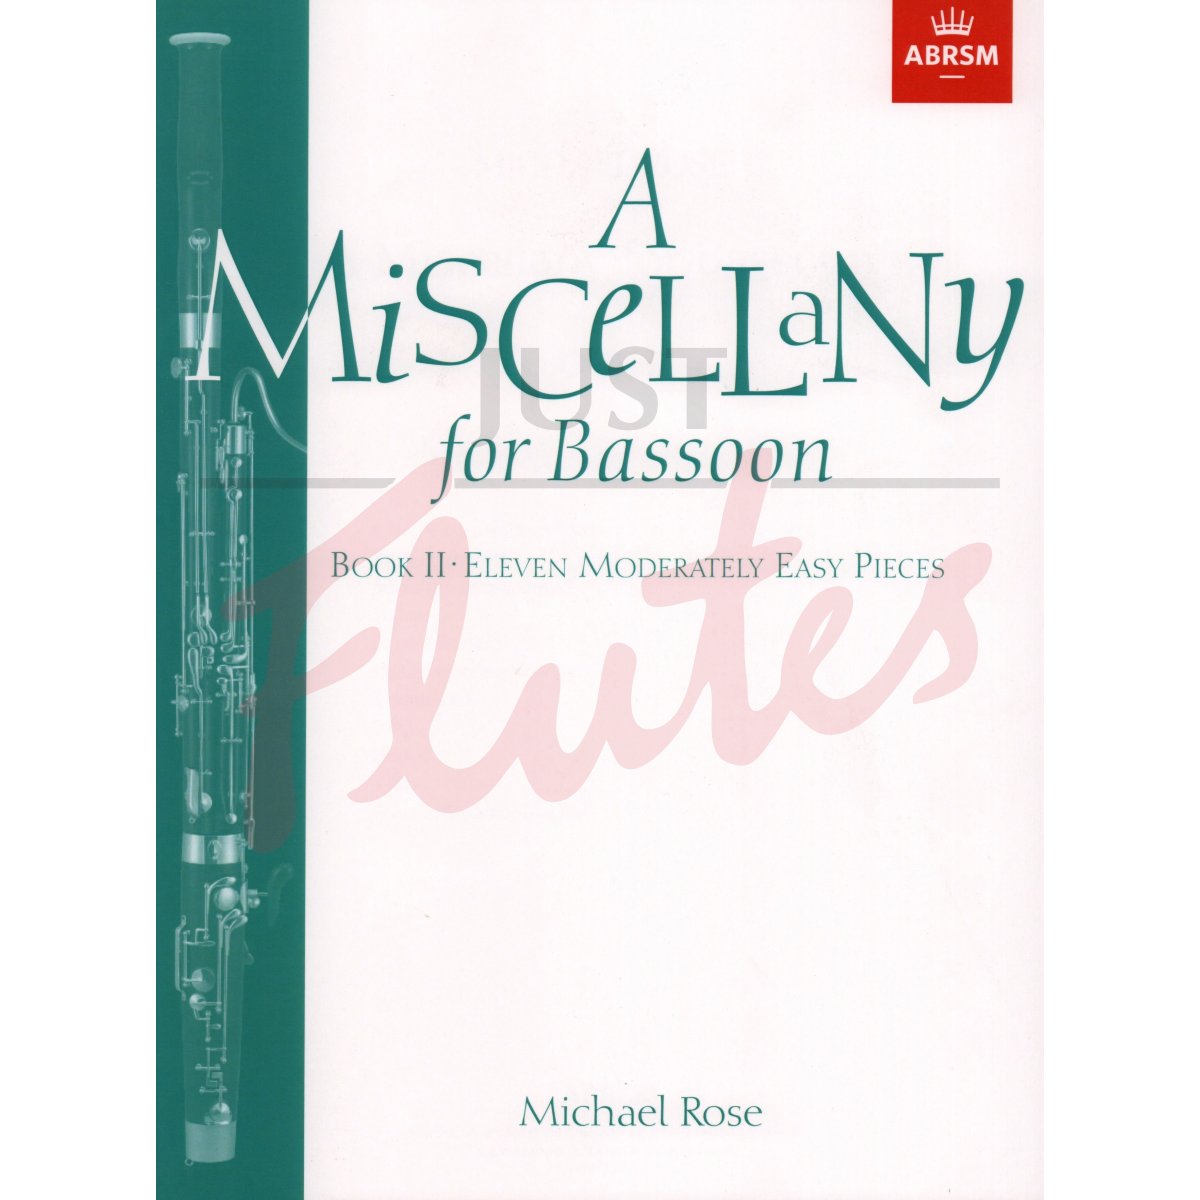 A Miscellany for Bassoon Book 2